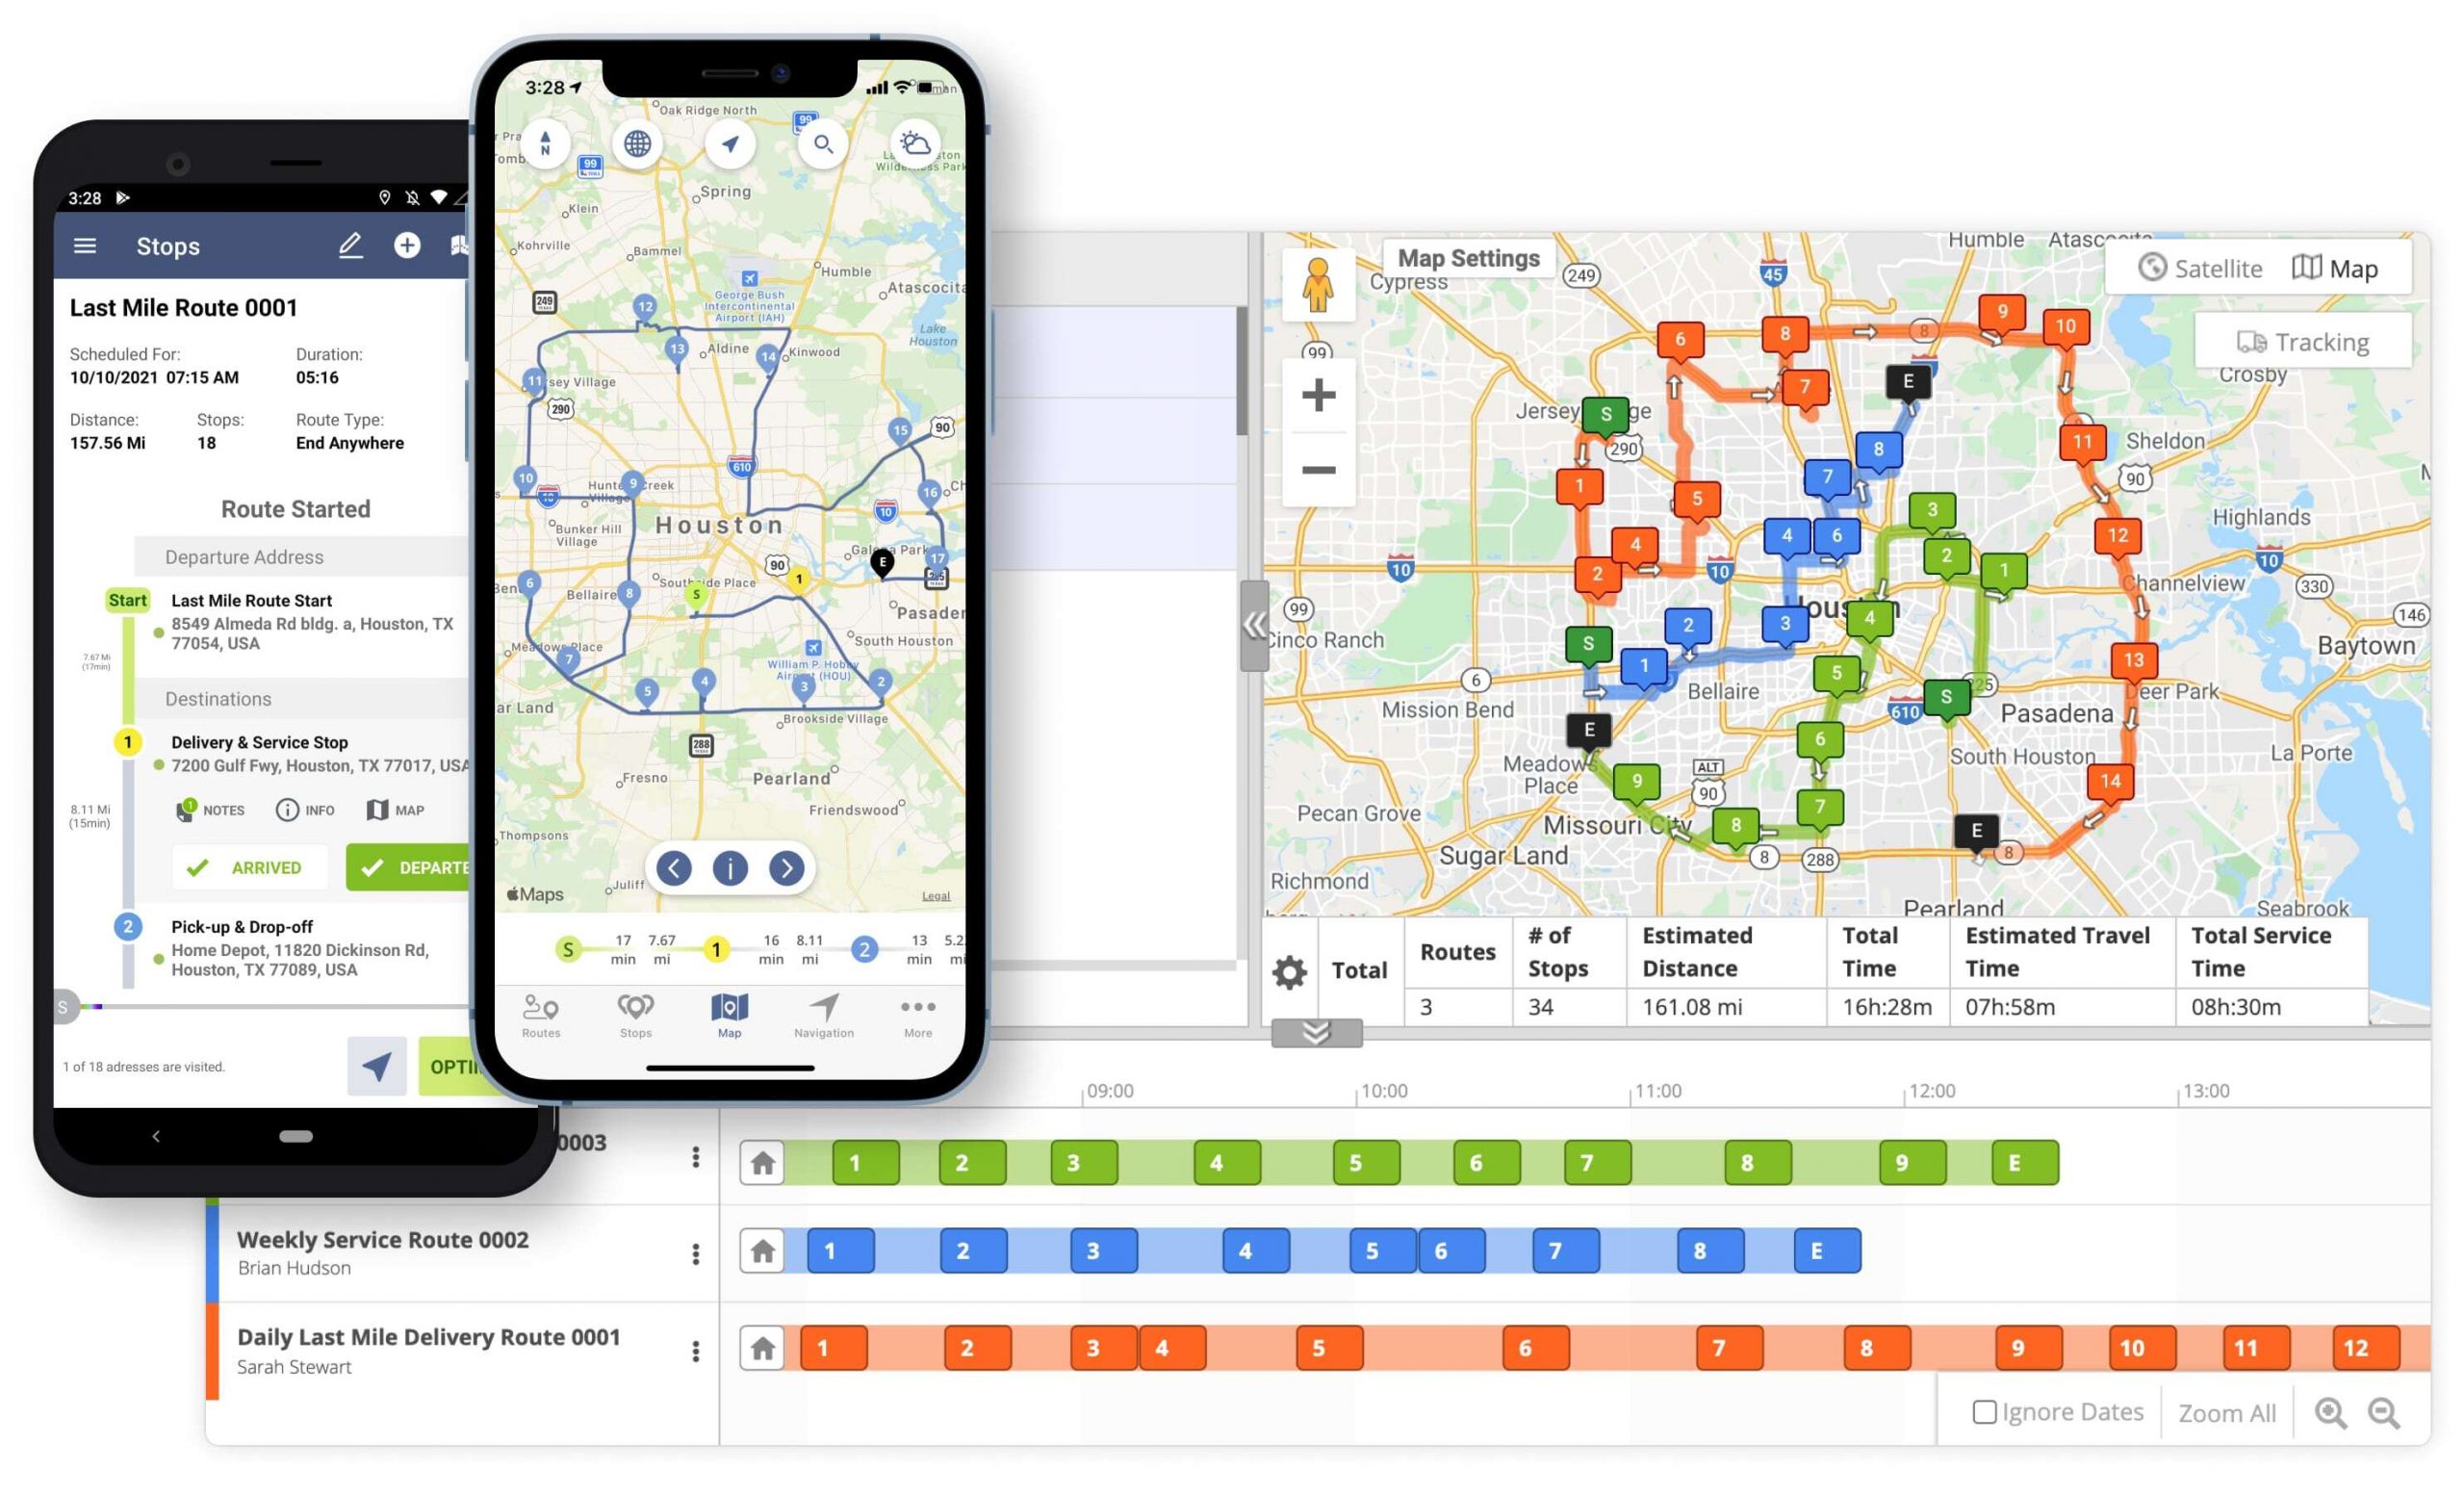 Flexible and dynamic route planning with Route4Me's web platform and route planner apps.